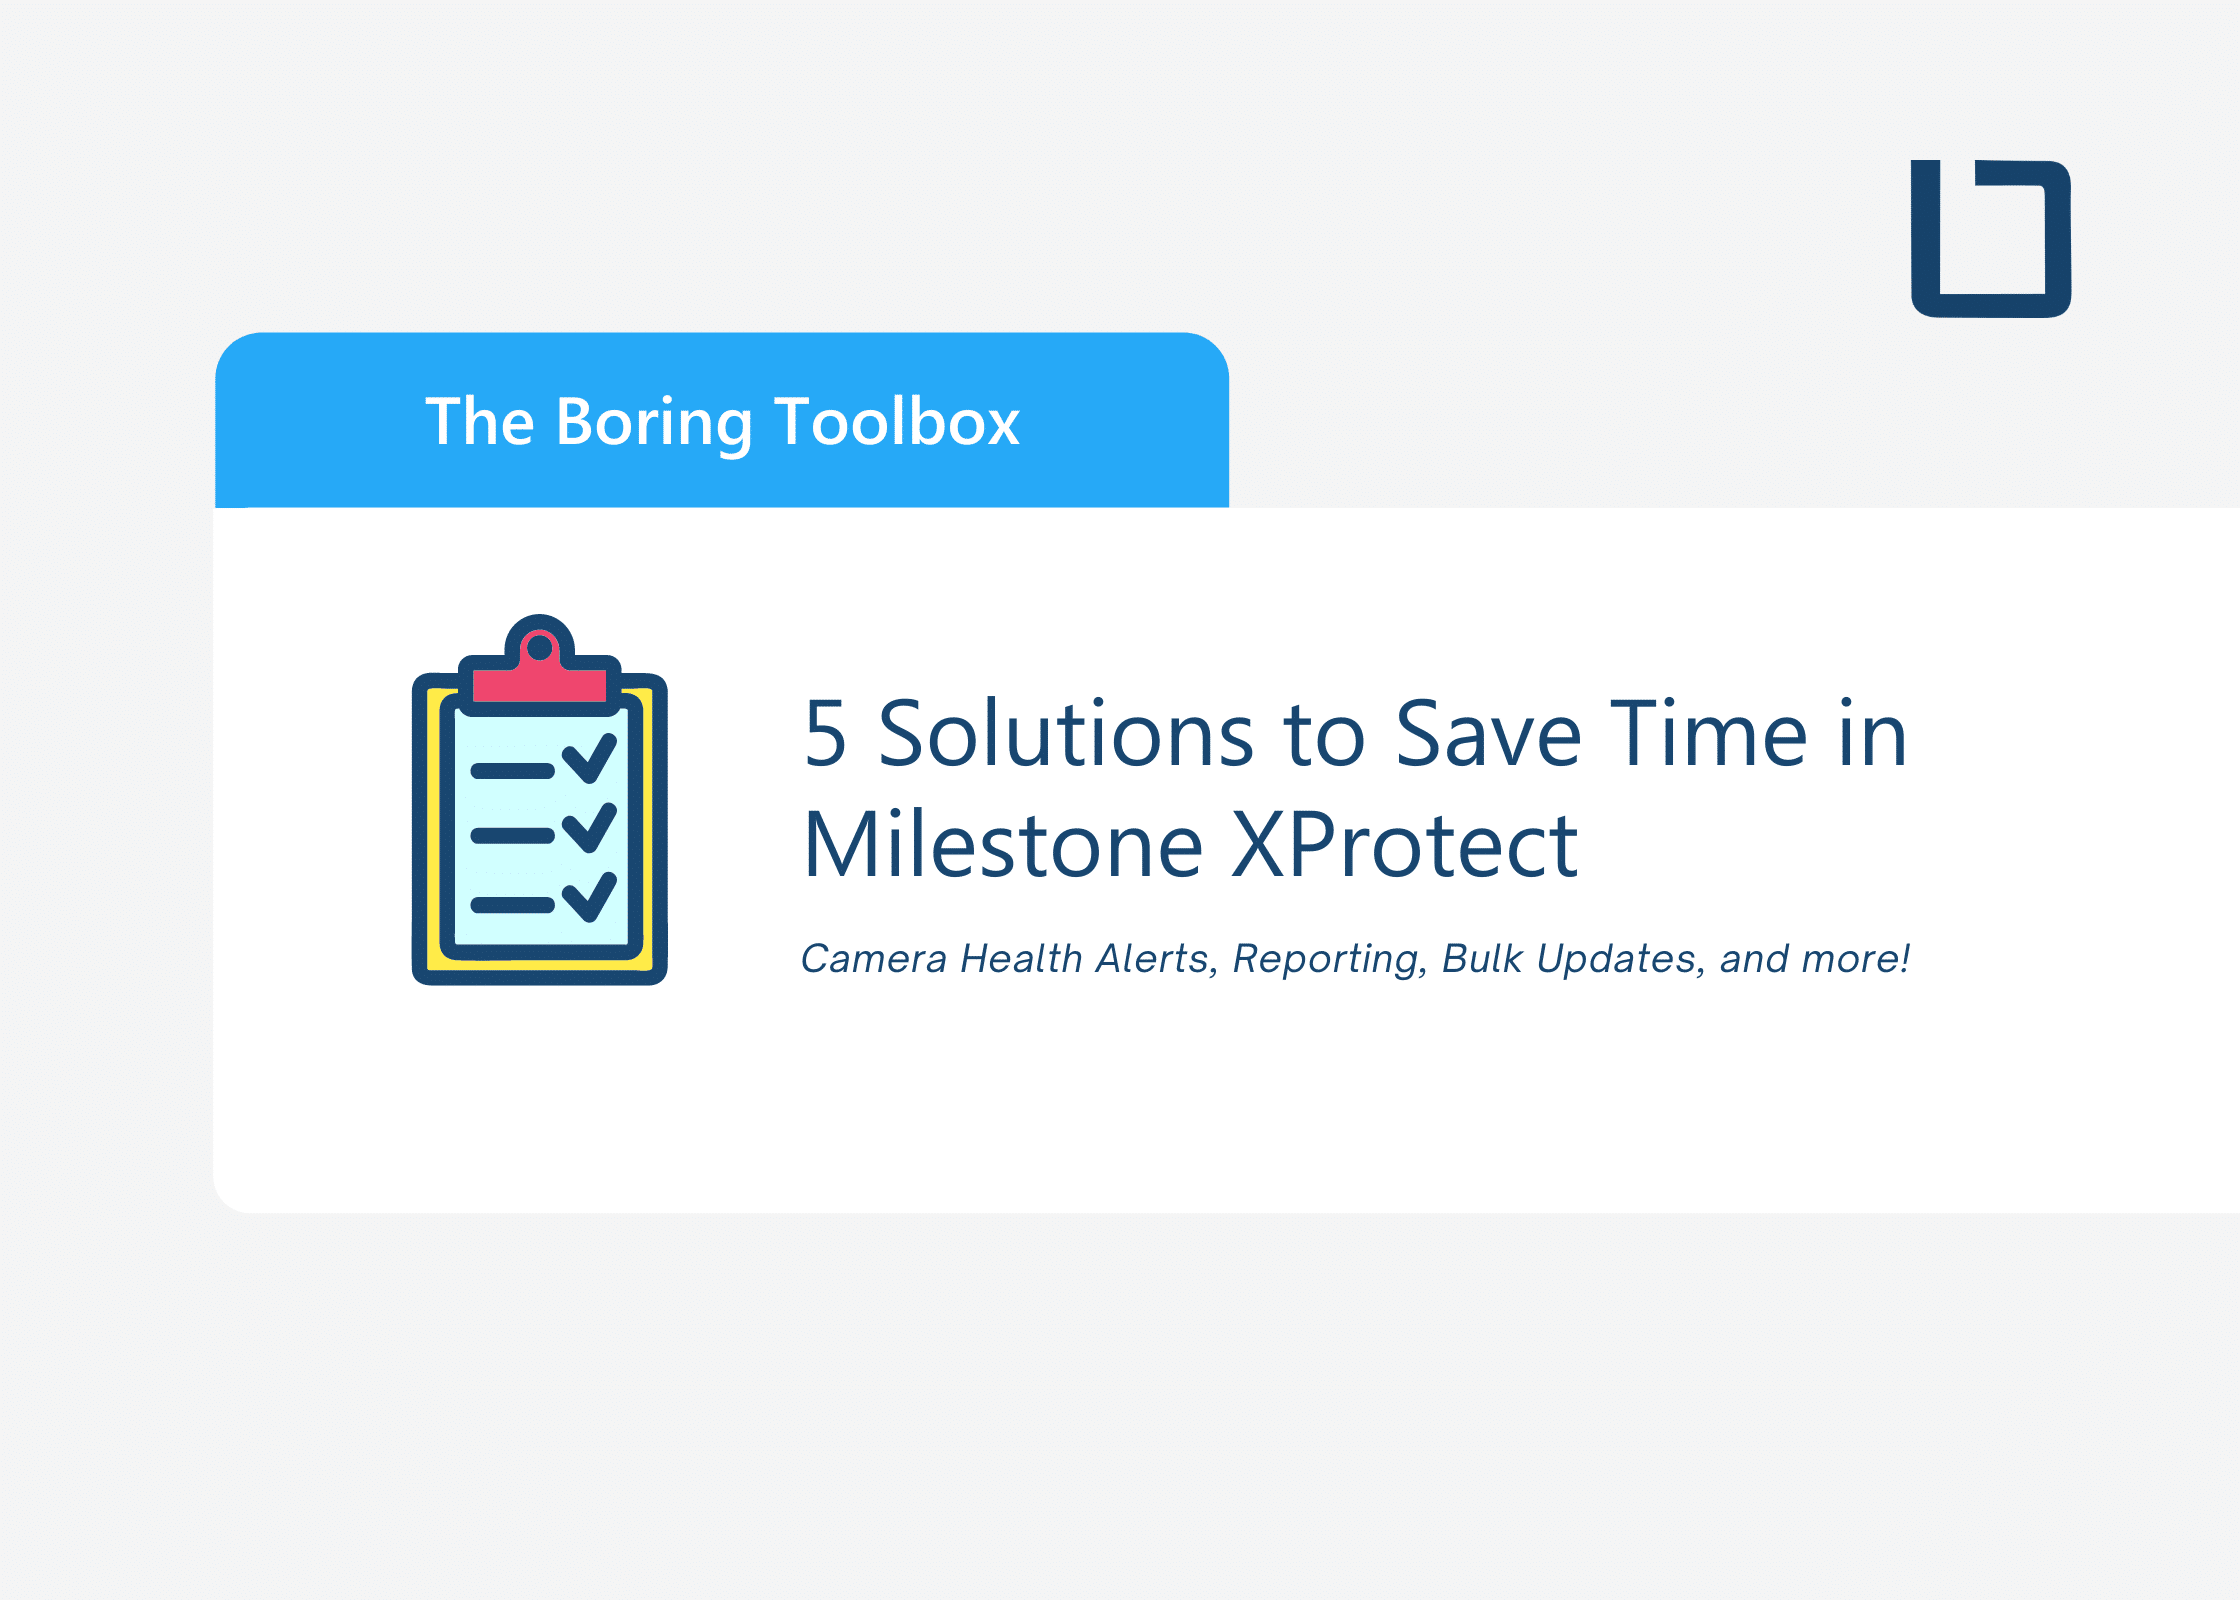 5 Solutions to Save Time in Milestone XProtect